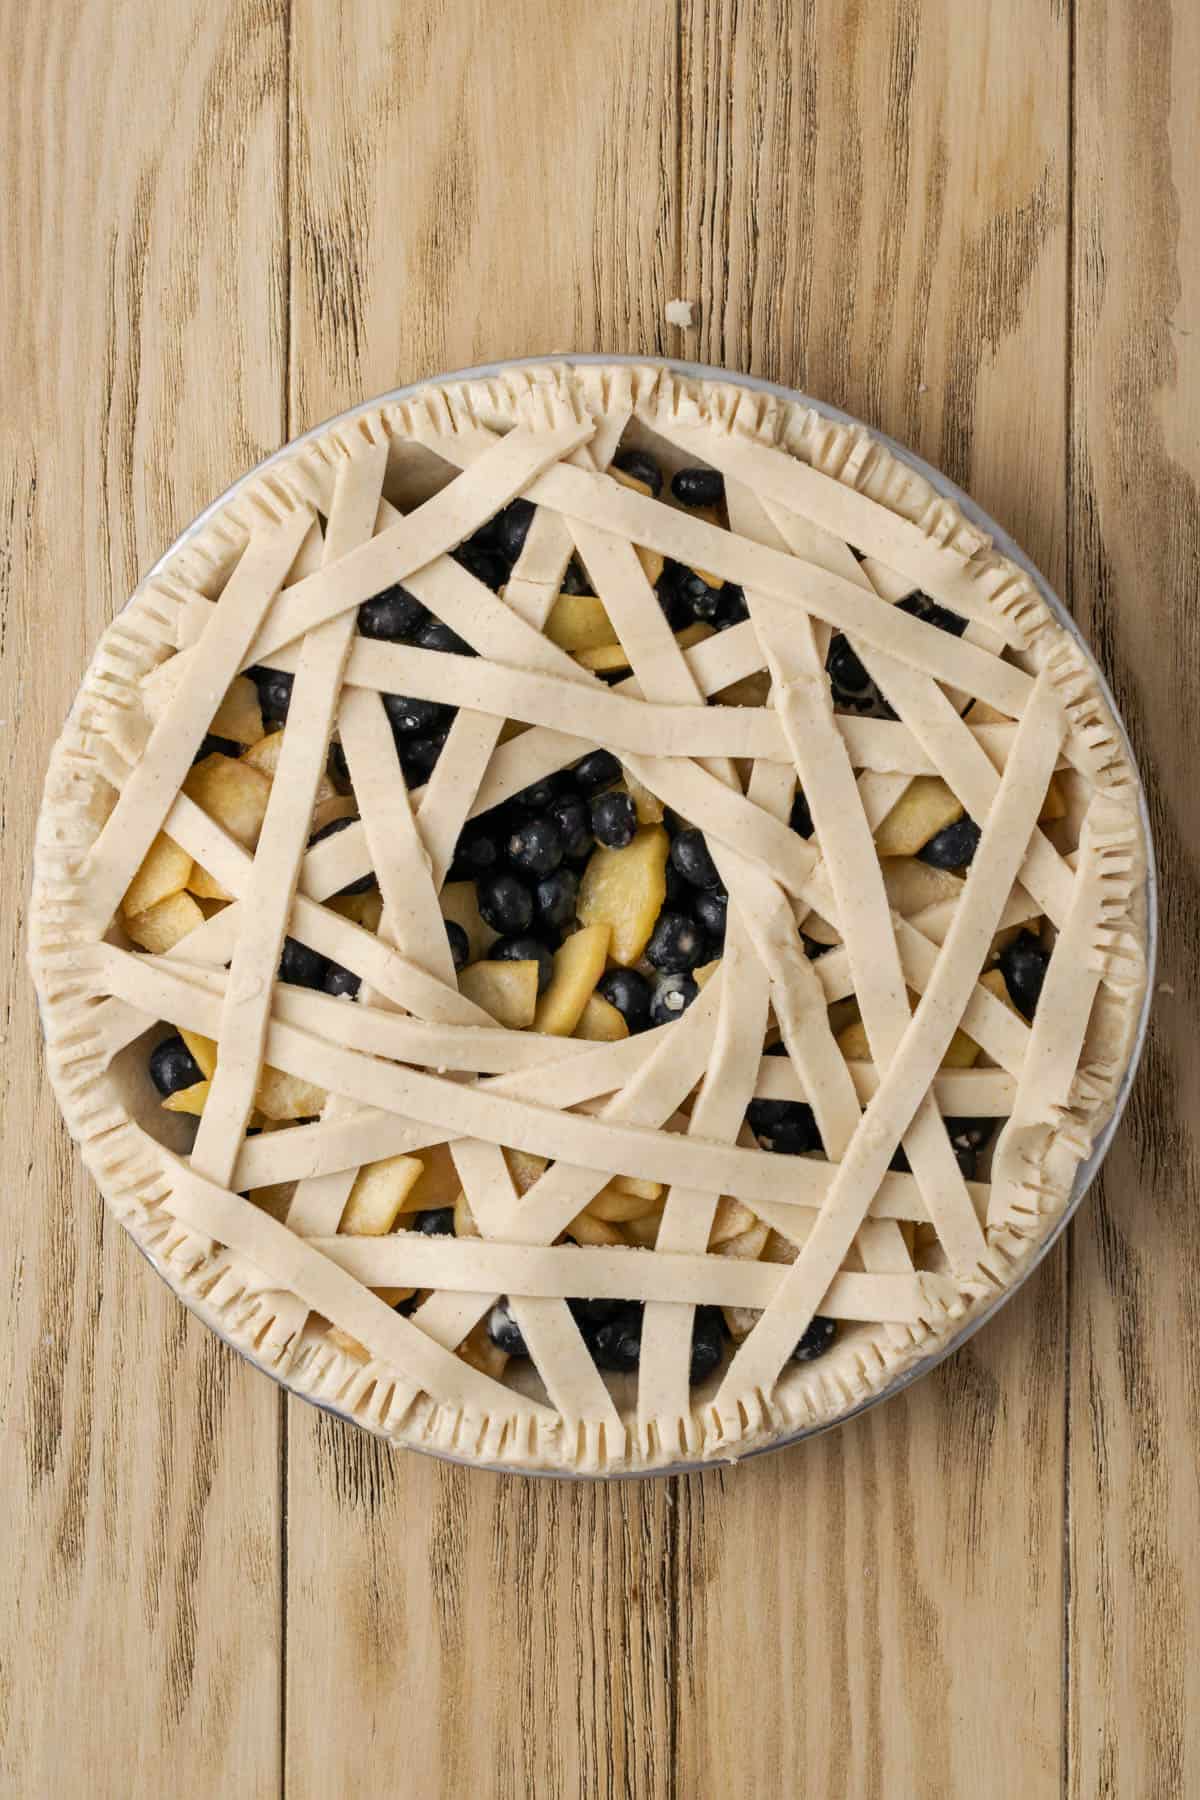 An unbaked apple blueberry pie with a decorative lattice top sitting on a wooden table. 